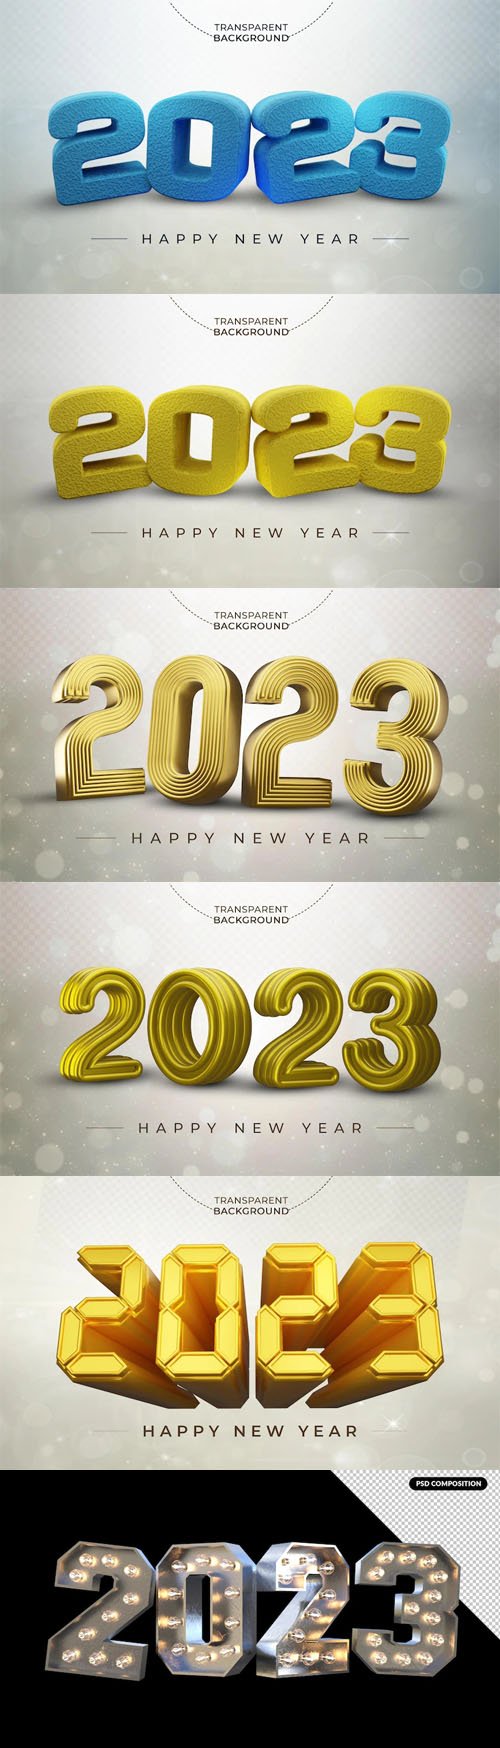 2023 Happy New Year - 3D Rendering PSD Templates